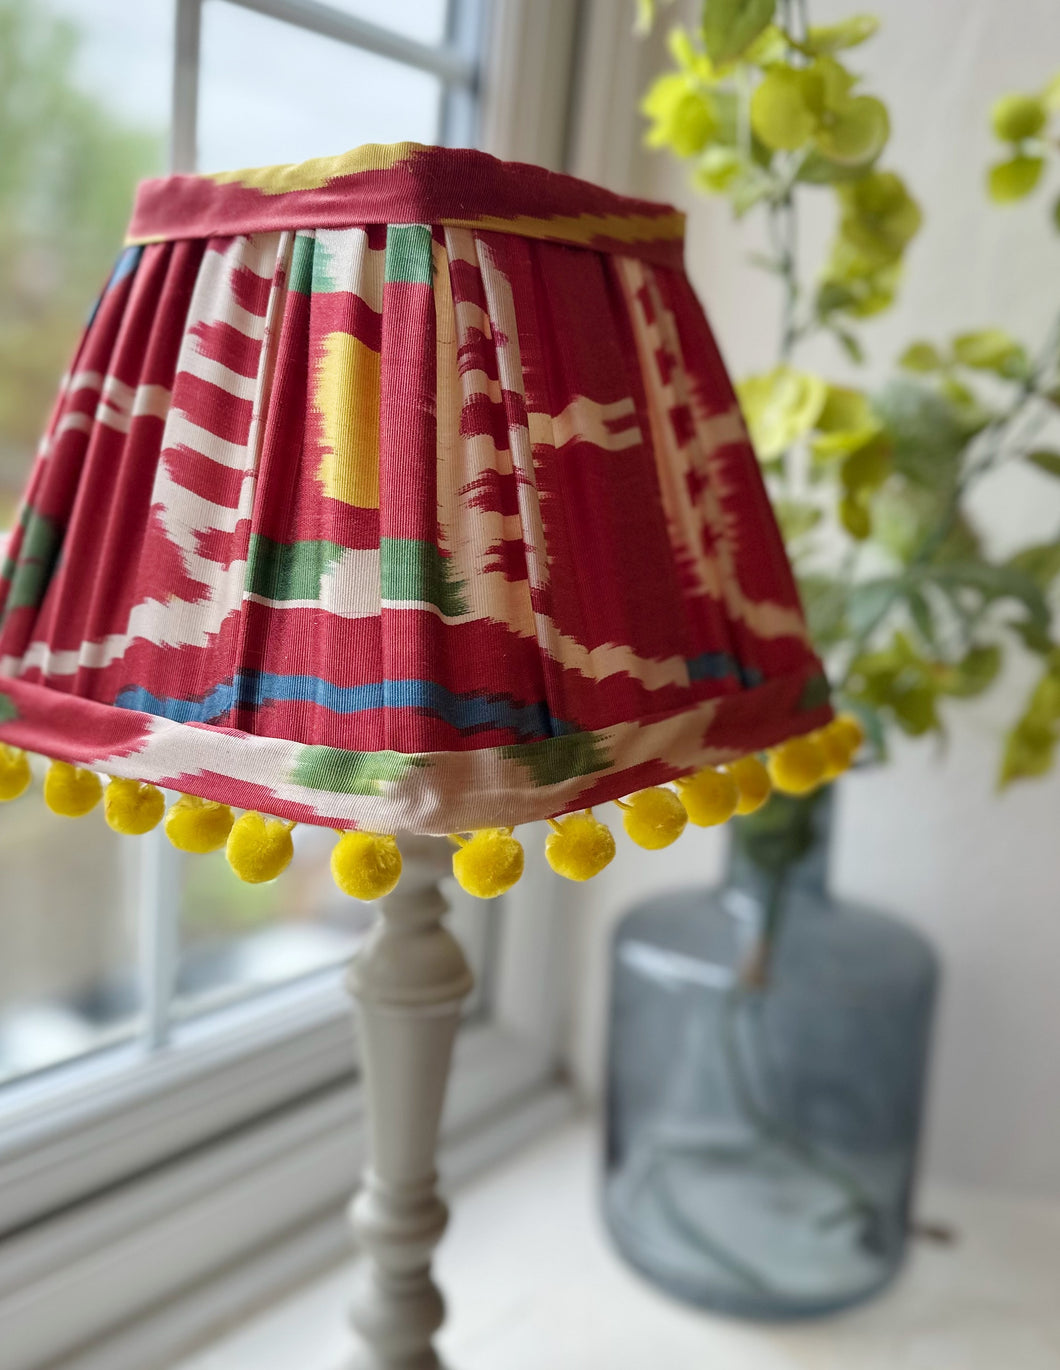 26cm Pleated Red Ikat Silk Lampshade - Red, Green & Yellow Pom Poms